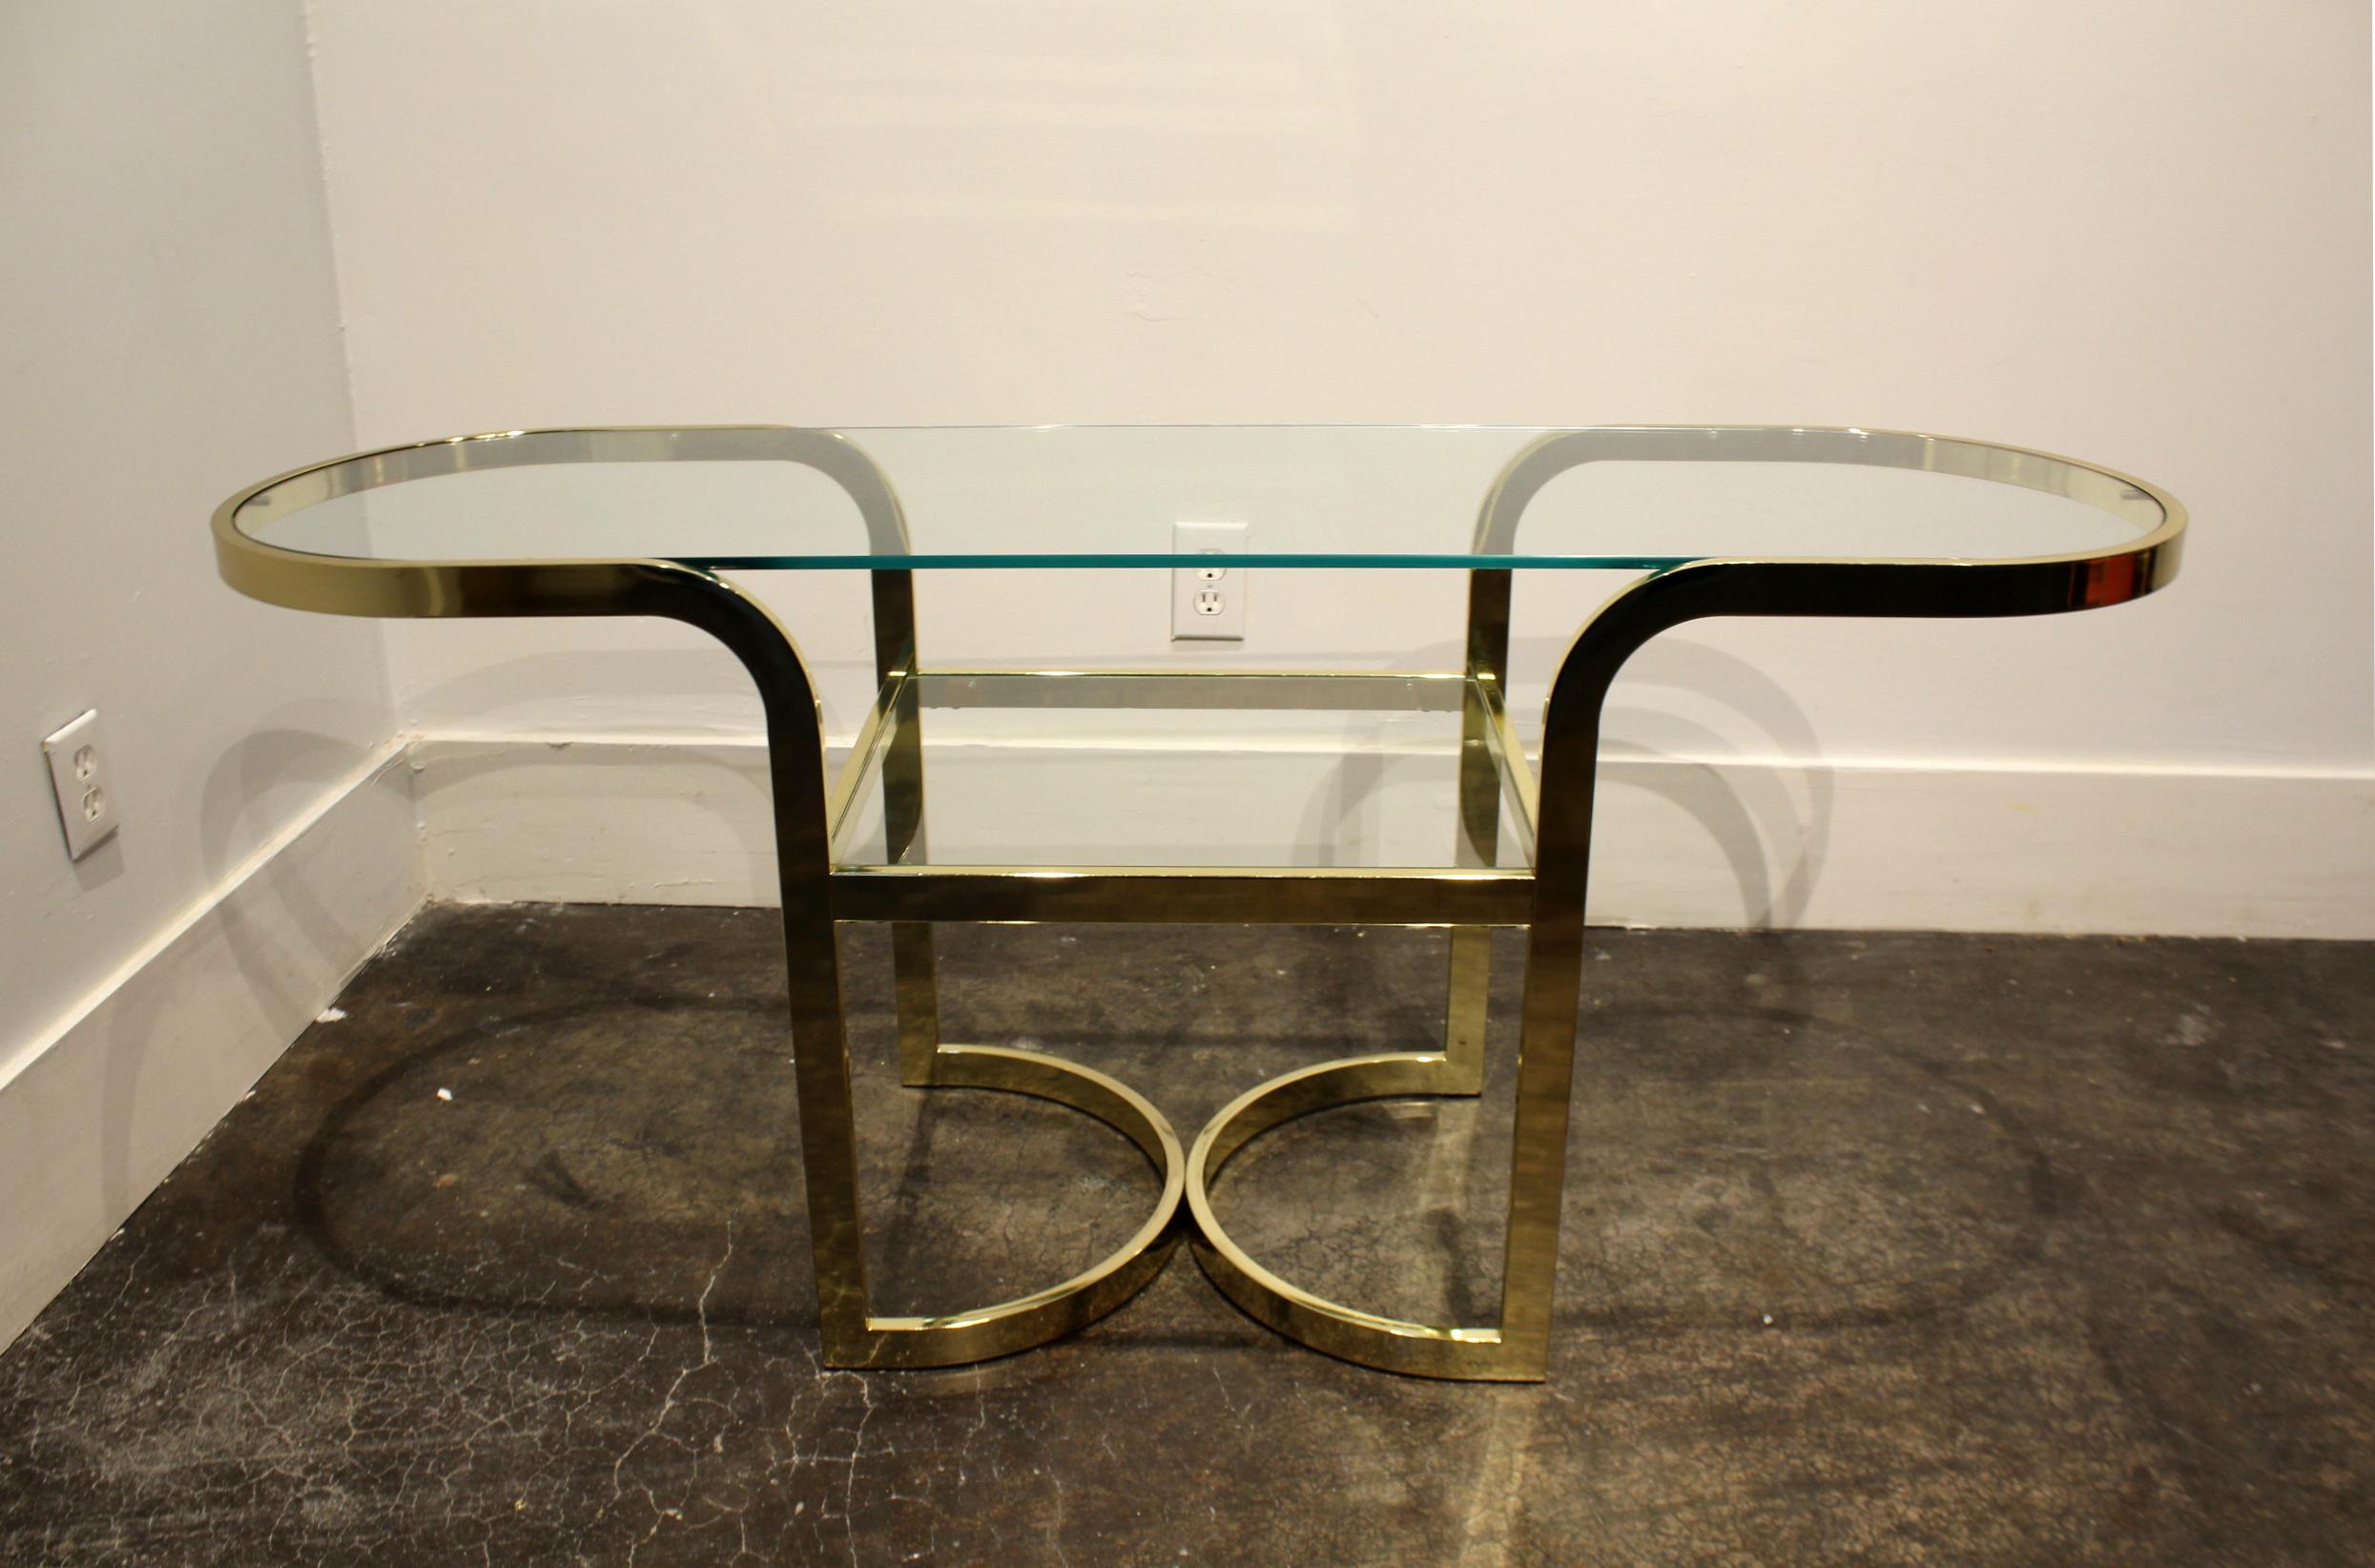 Brass Console Cafe Table with Pink Chairs by DIA Design Institute of America (20. Jahrhundert) im Angebot